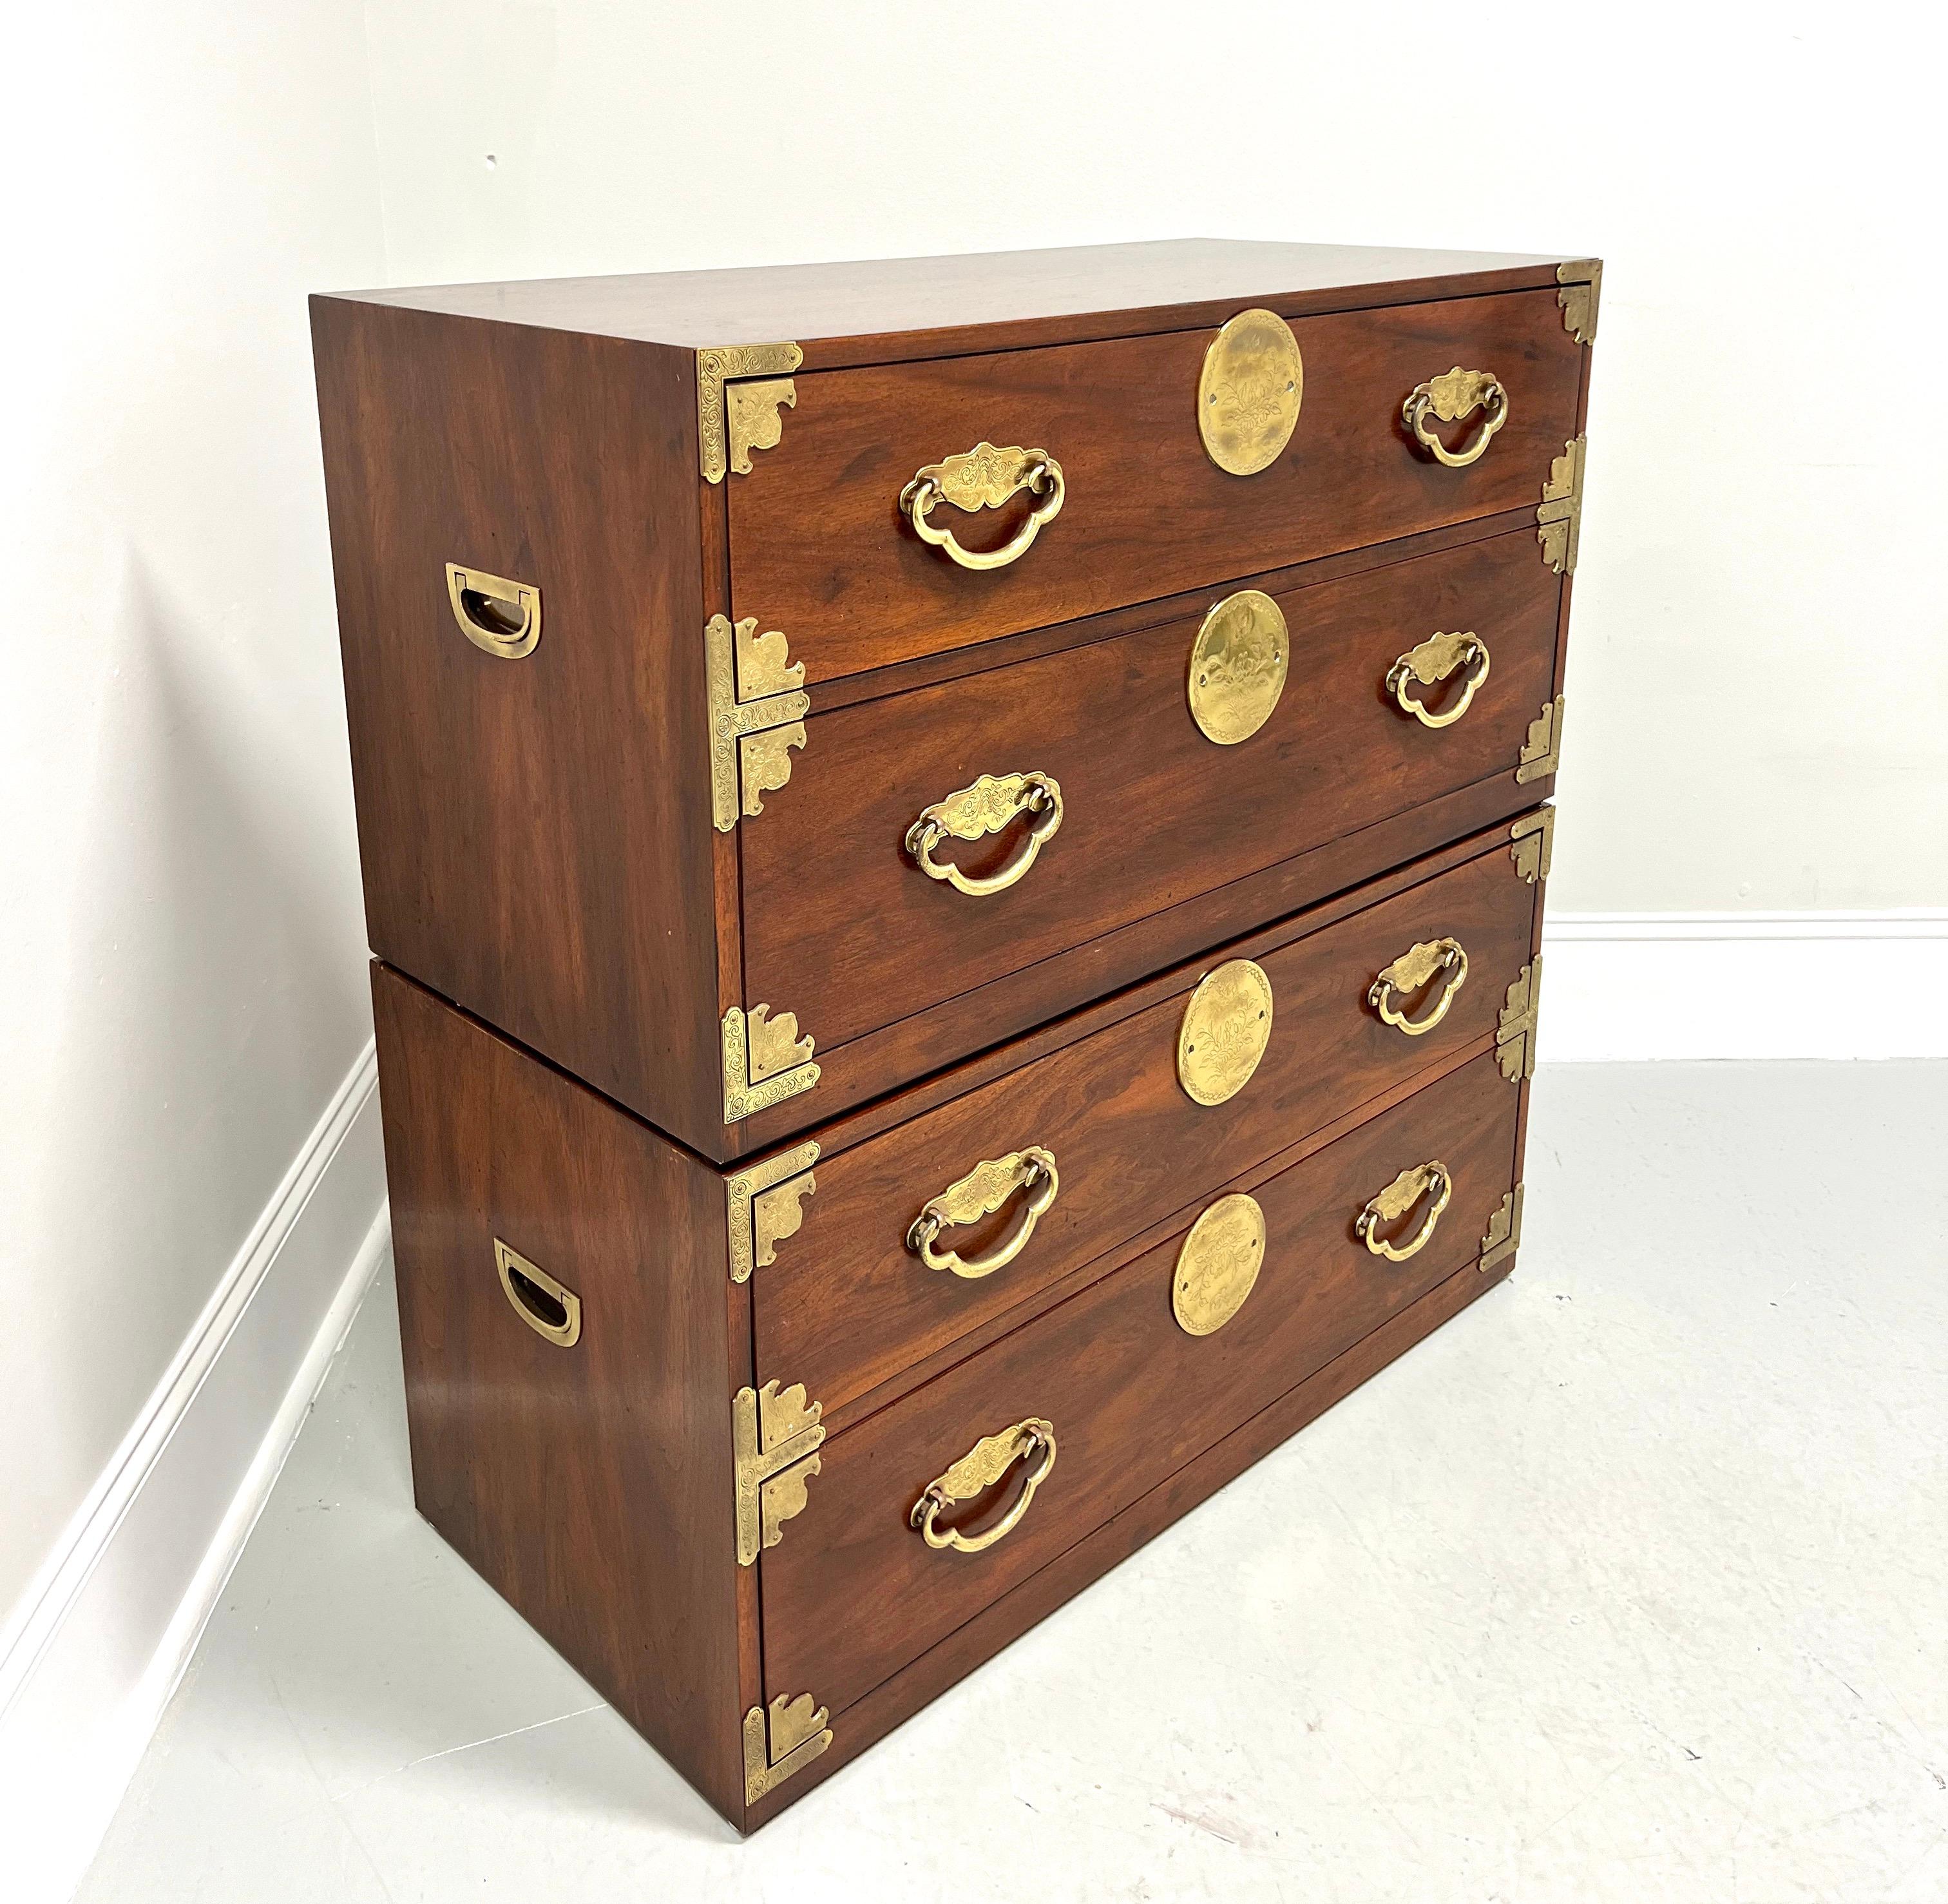 A pair of modular stackable two-drawer chests in the Japanese Tansu Campaign style by Henredon. Mahogany with smooth surface top, low height, brass accents, drawer handles & side handles, and stackable. Features two large drawers of dovetail